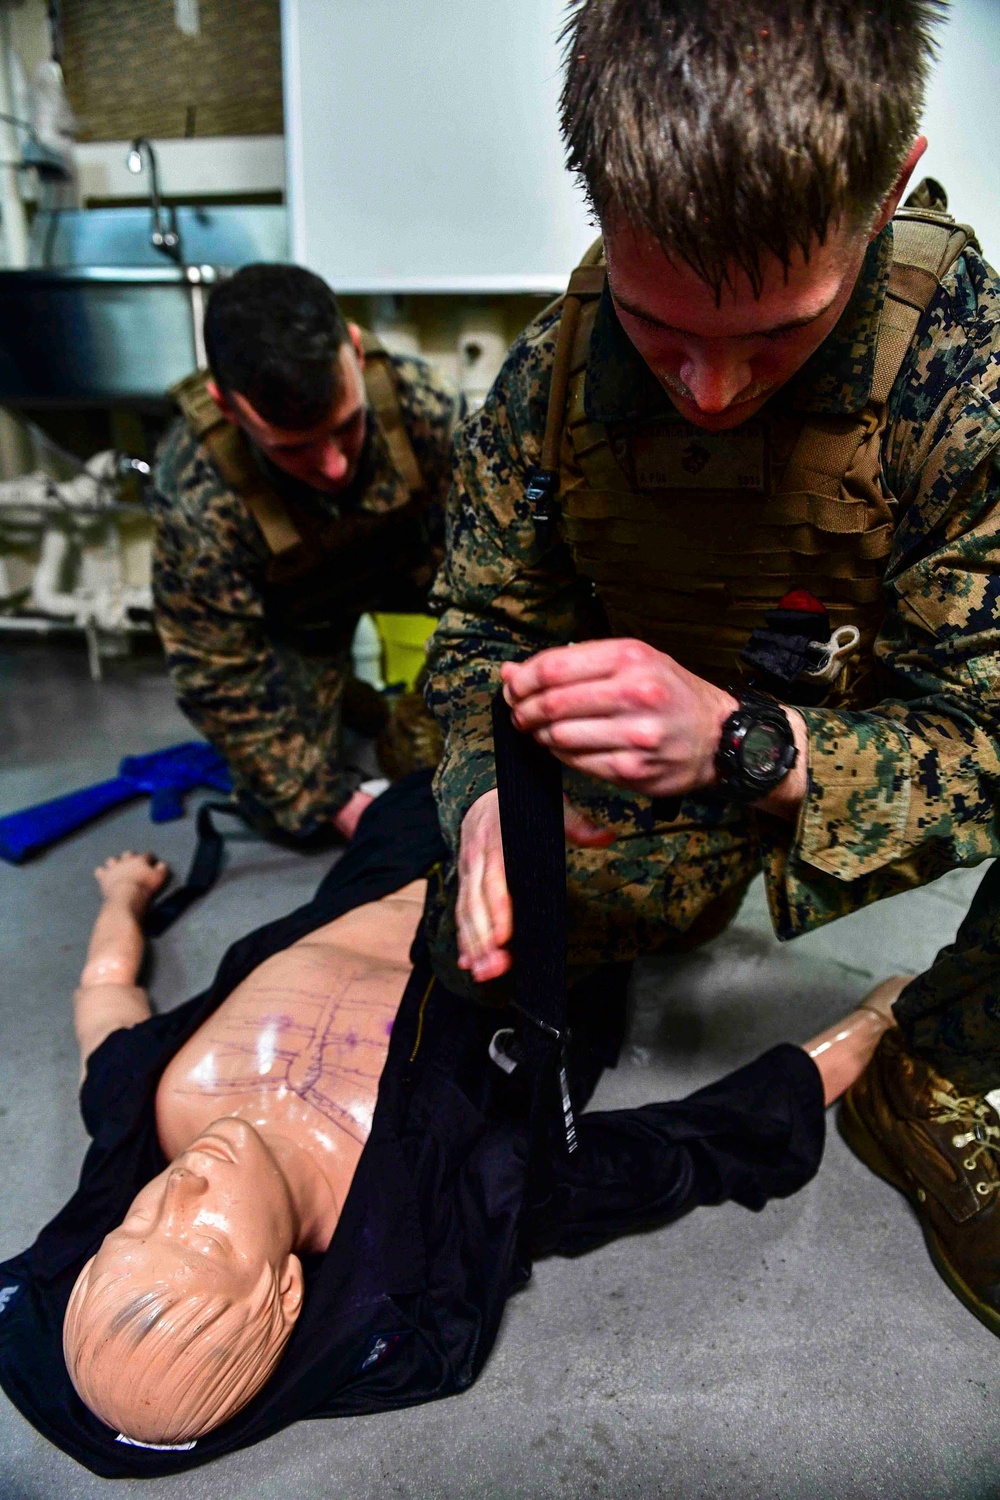 USS San Diego (LPD 22) Tactical Combat Casualty Care Course